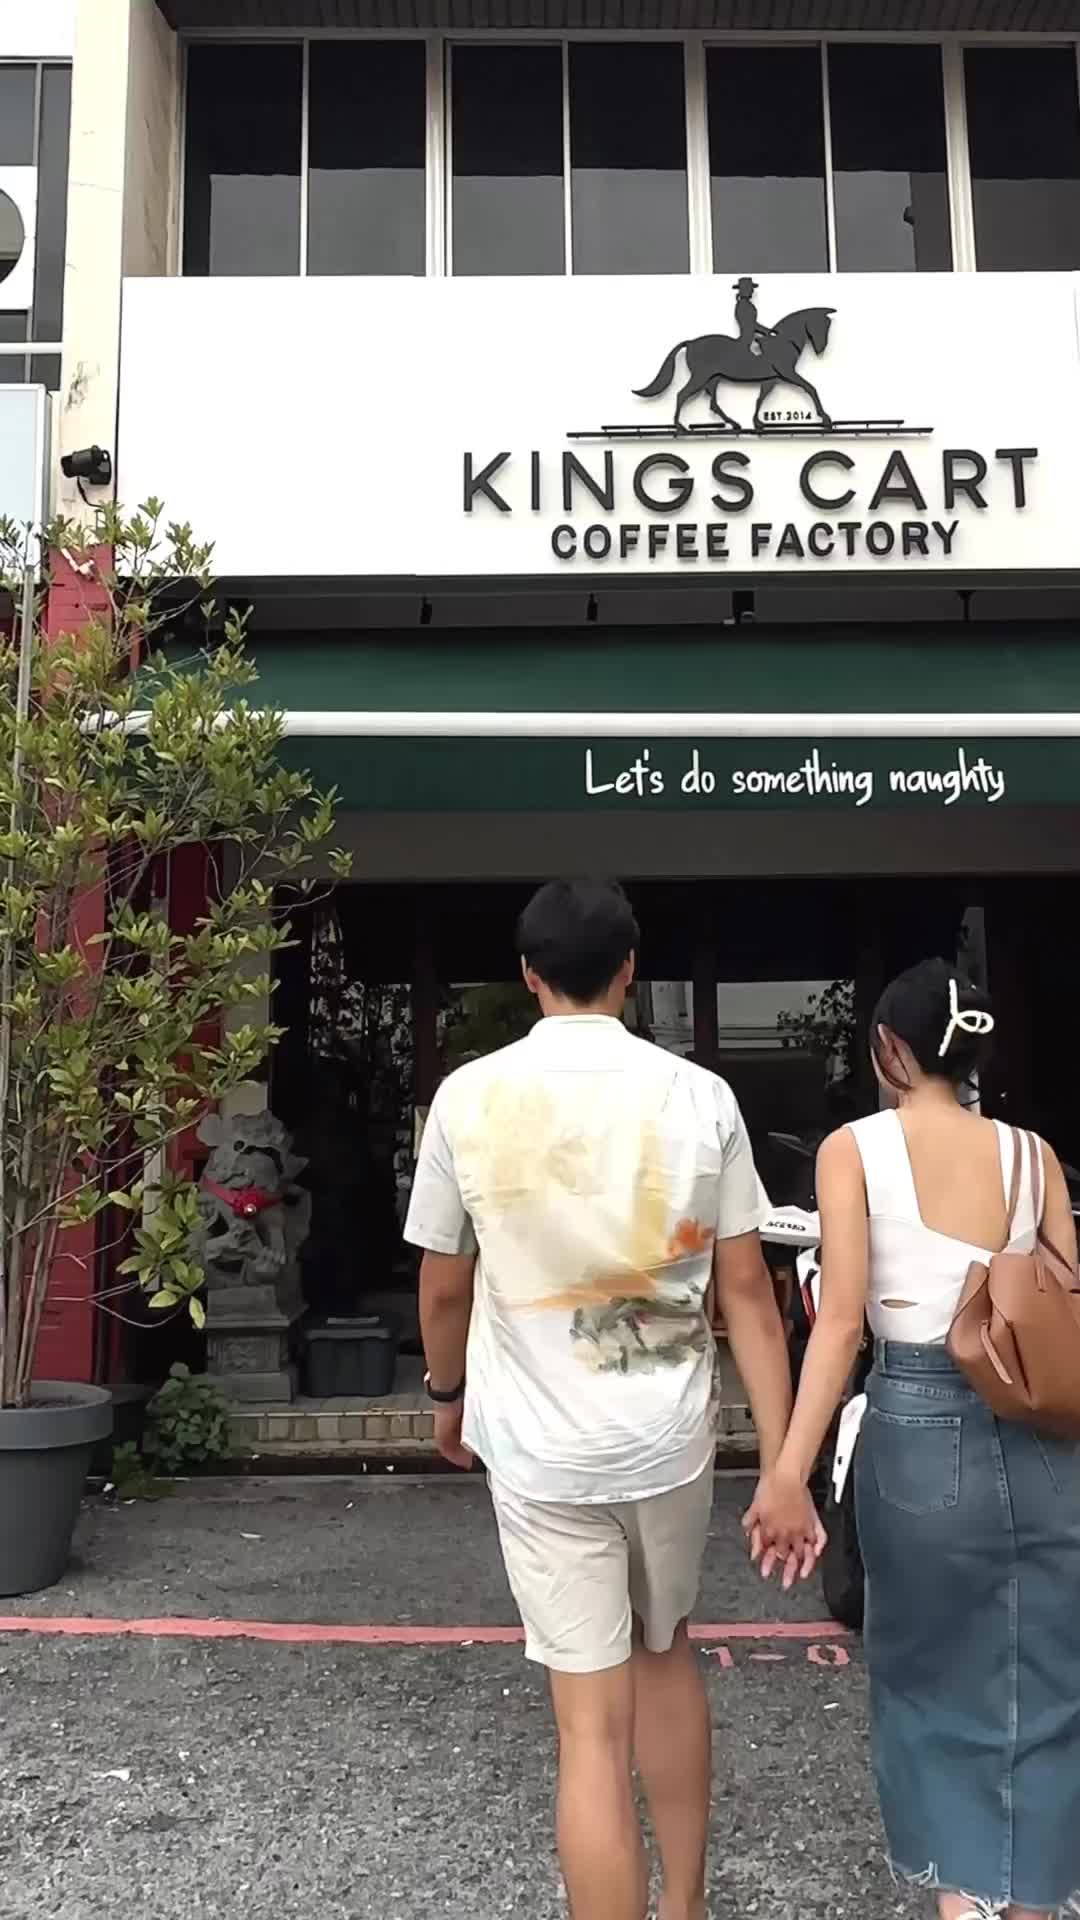 Kings Cart Coffee: 50% Off Second Main Dish Deal!